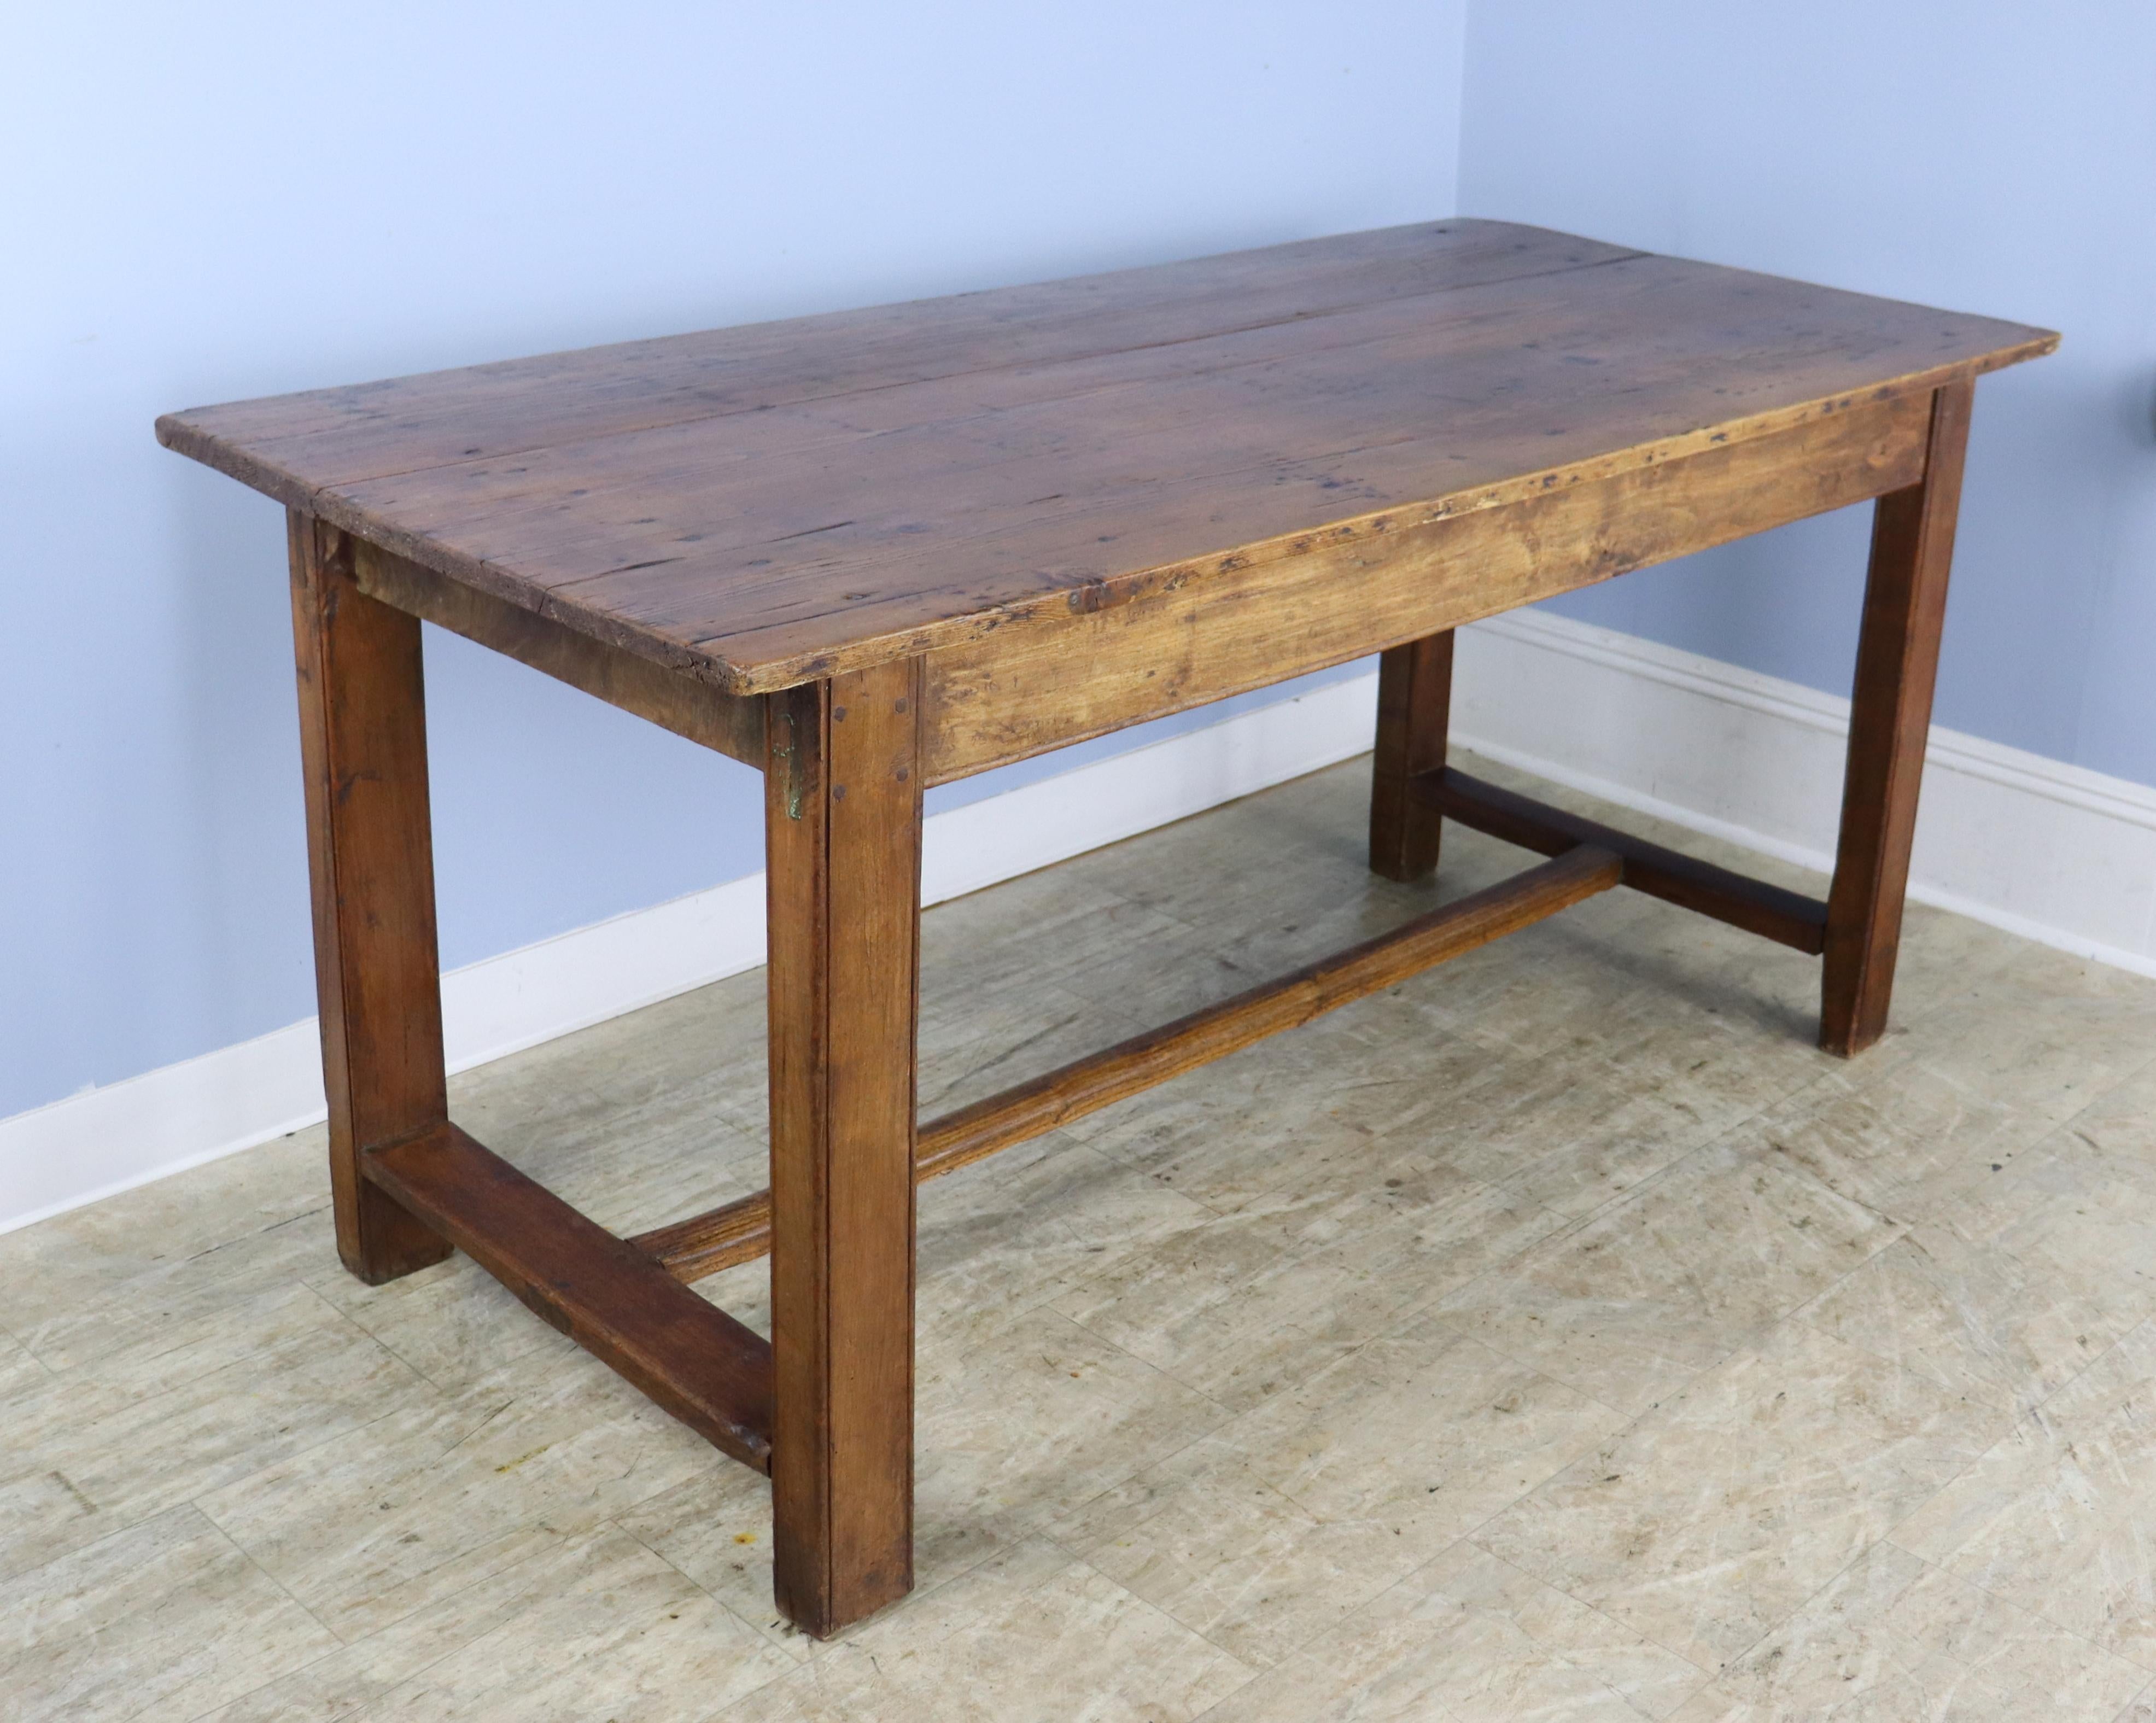 A smaller rustic trestle based farm table with a pine top and an oak base.  The top has been polished to a shine and has lots of good pine grain and texture, as well a some age appropriate marks and wear.  The bottom has lovely chunky legs and the